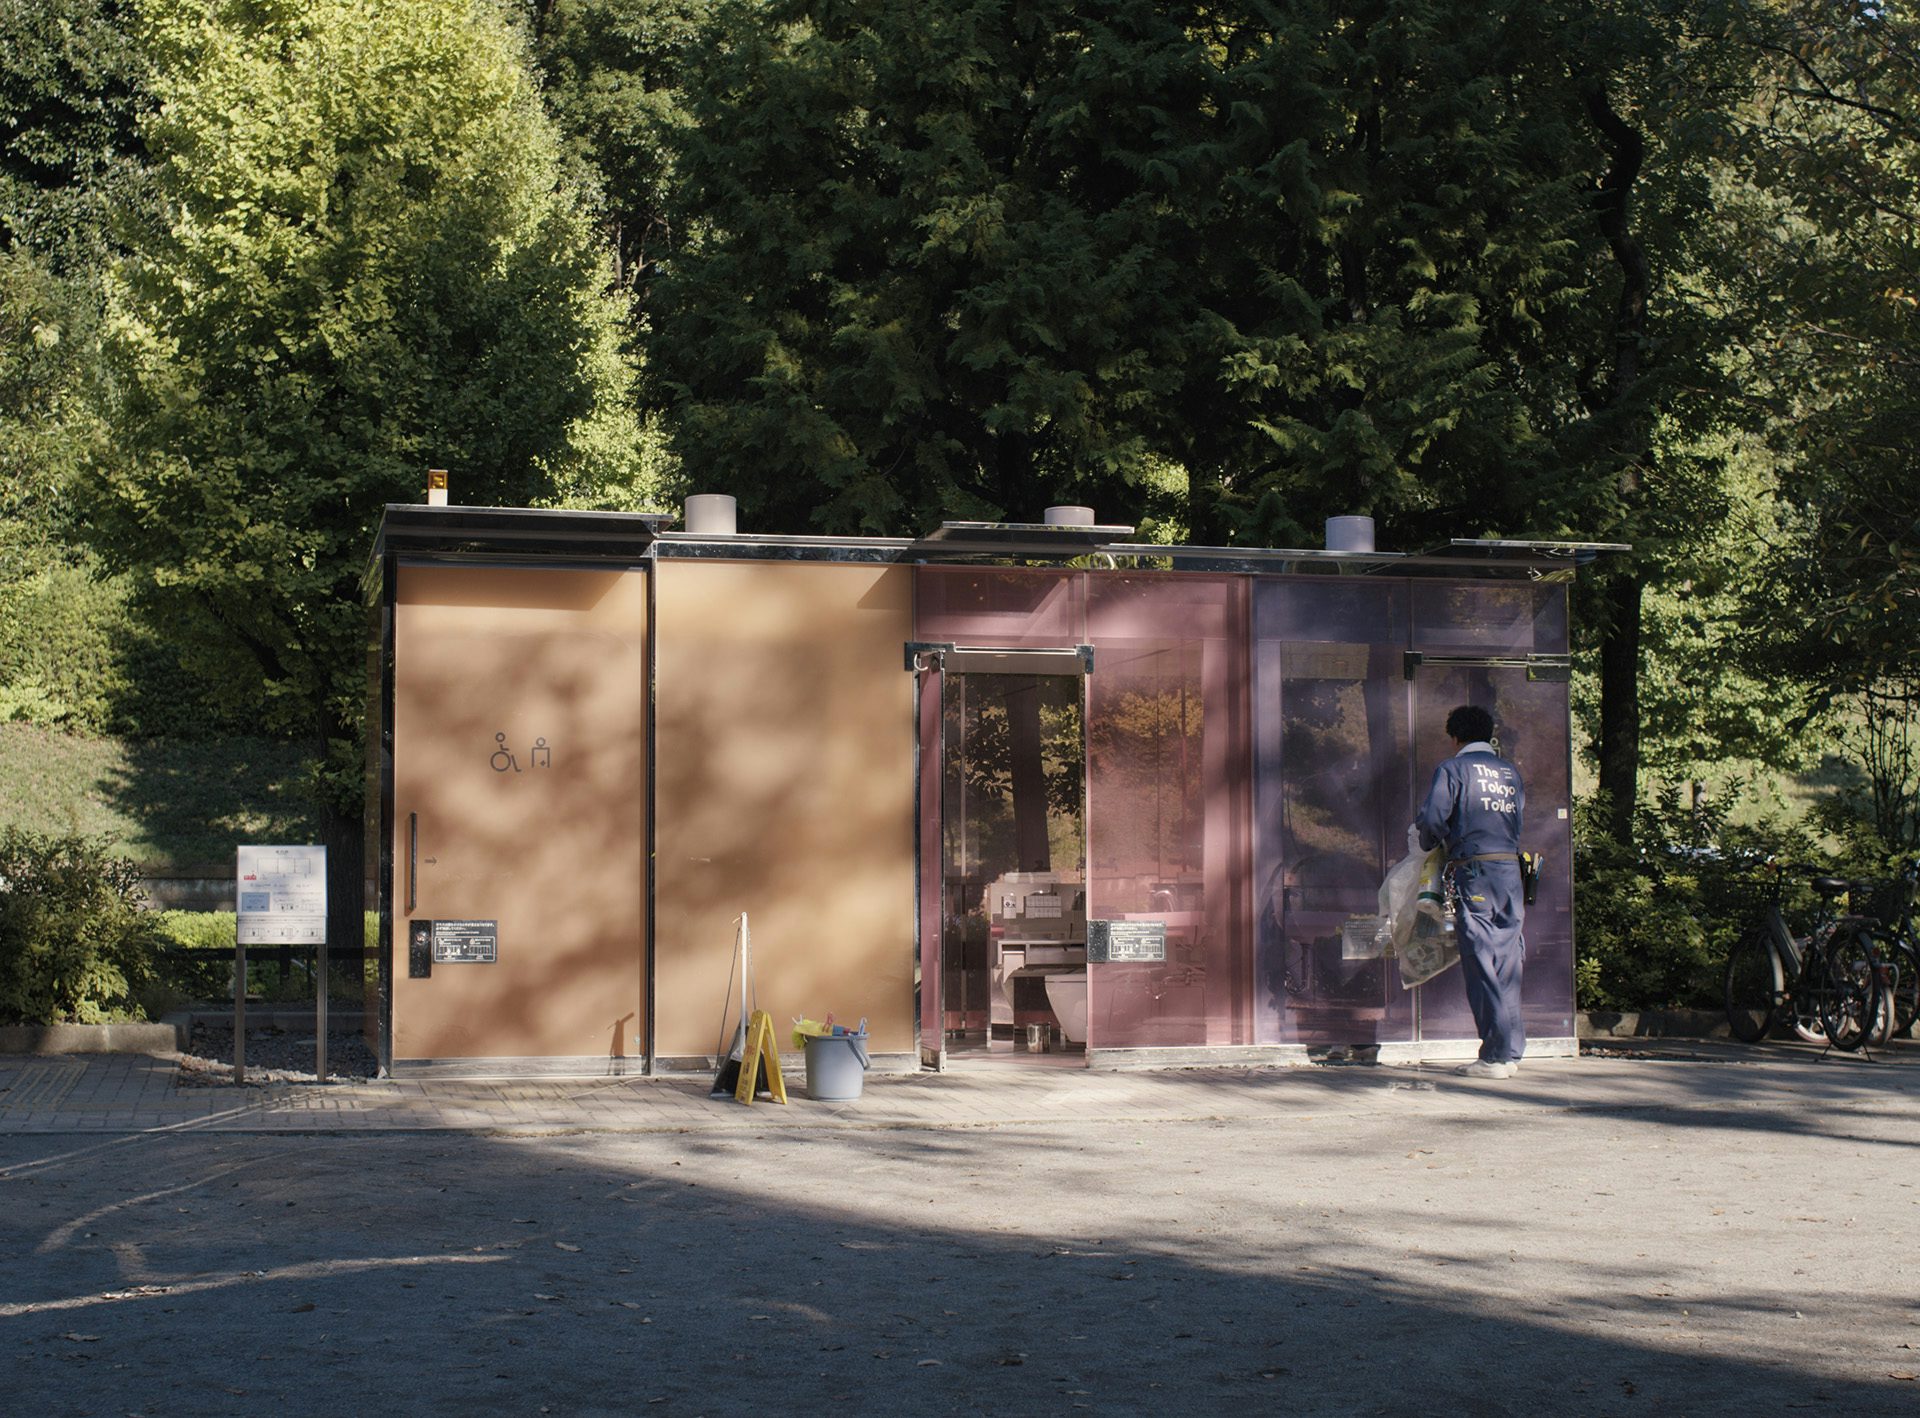 Film still from Perfect Days showing the pastel coloured glass public restroom in a Tokyo park